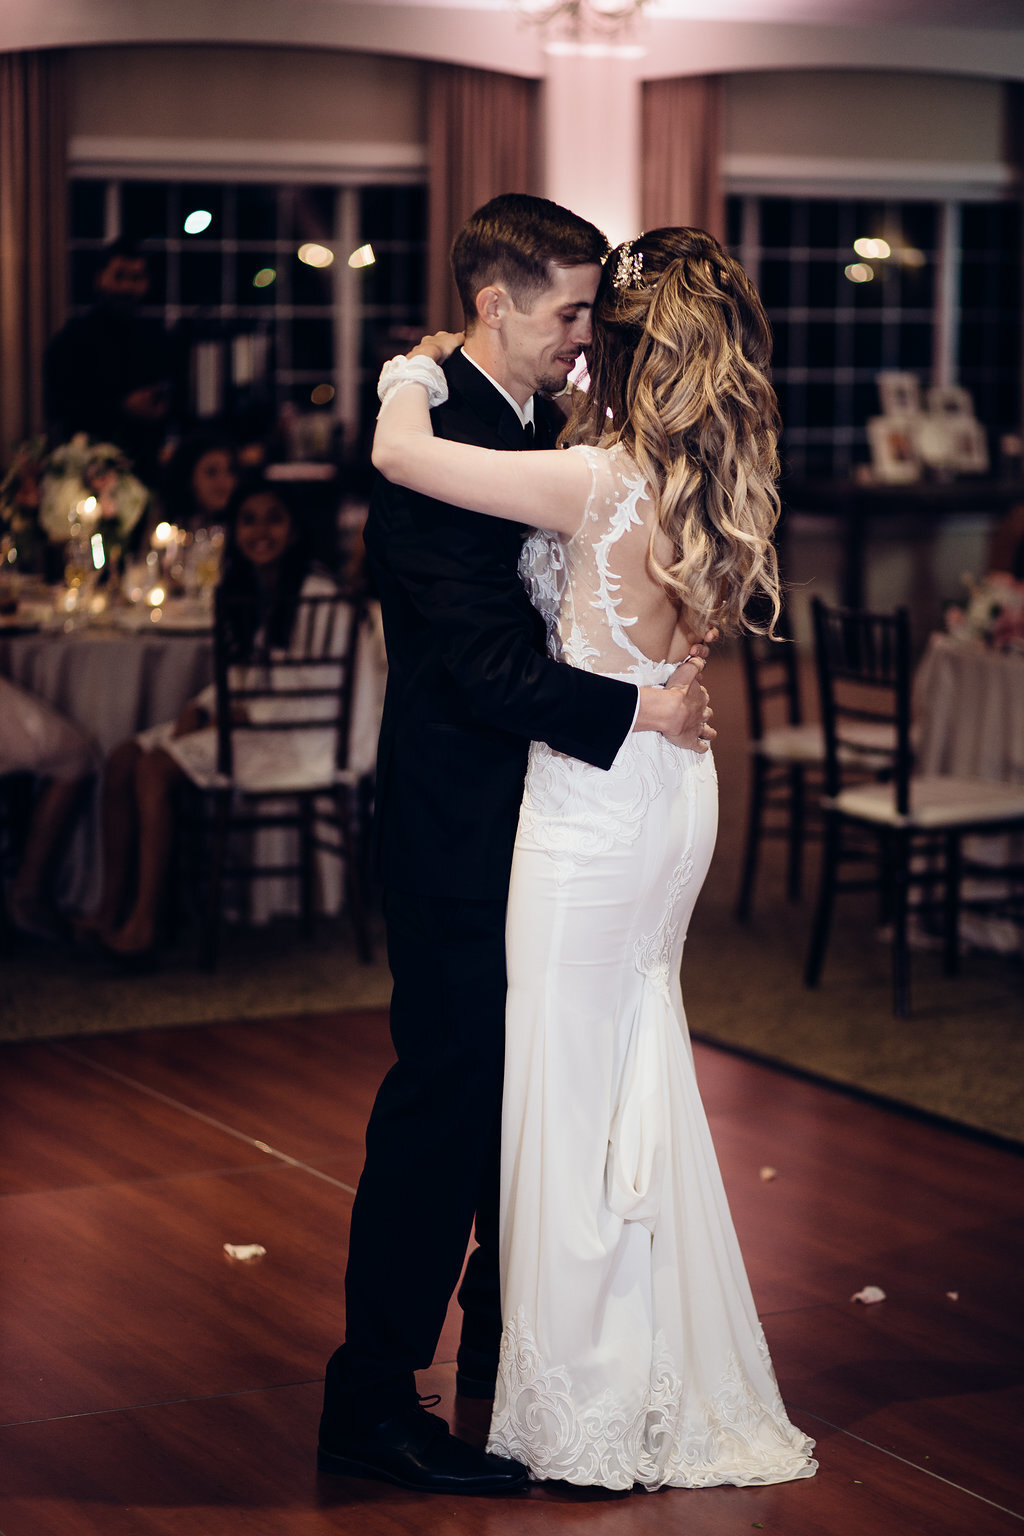 Wedding Photograph Of Bride And Groom Having Their Faces So Close While Dancing Los Angeles